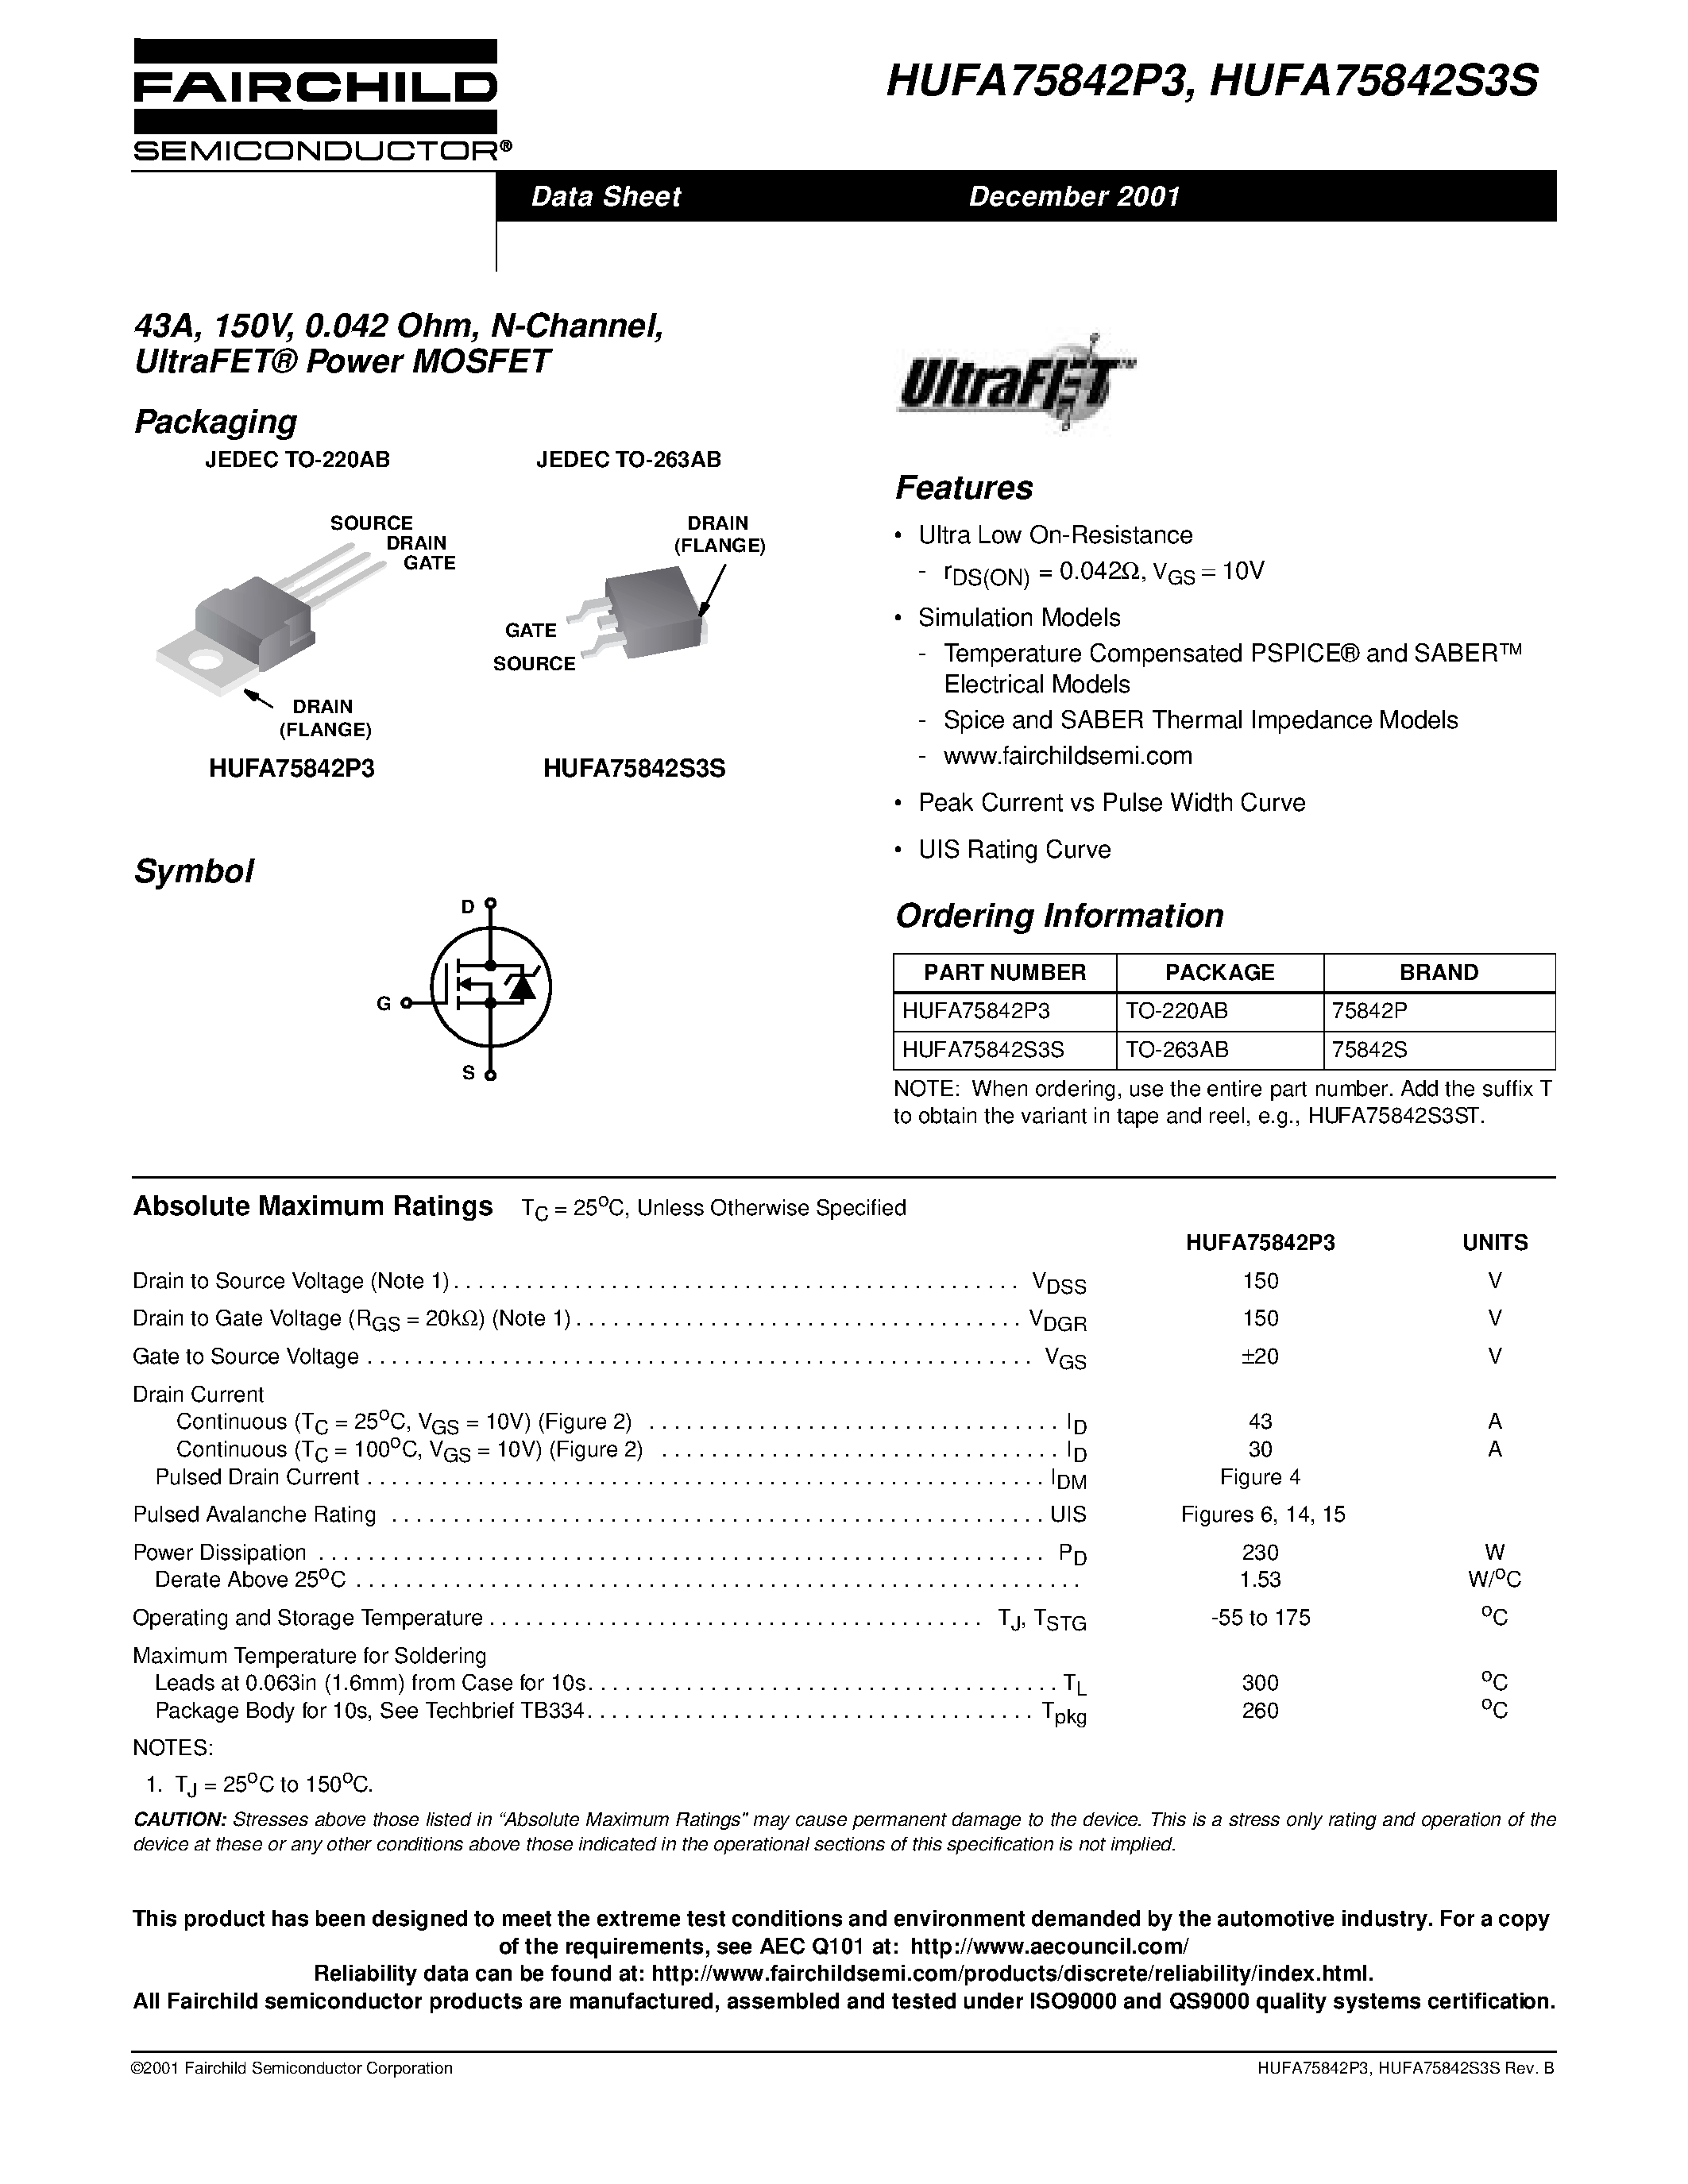 Datasheet HUFA75842P3 - 43A/ 150V/ 0.042 Ohm/ N-Channel/ UltraFET Power MOSFET page 1